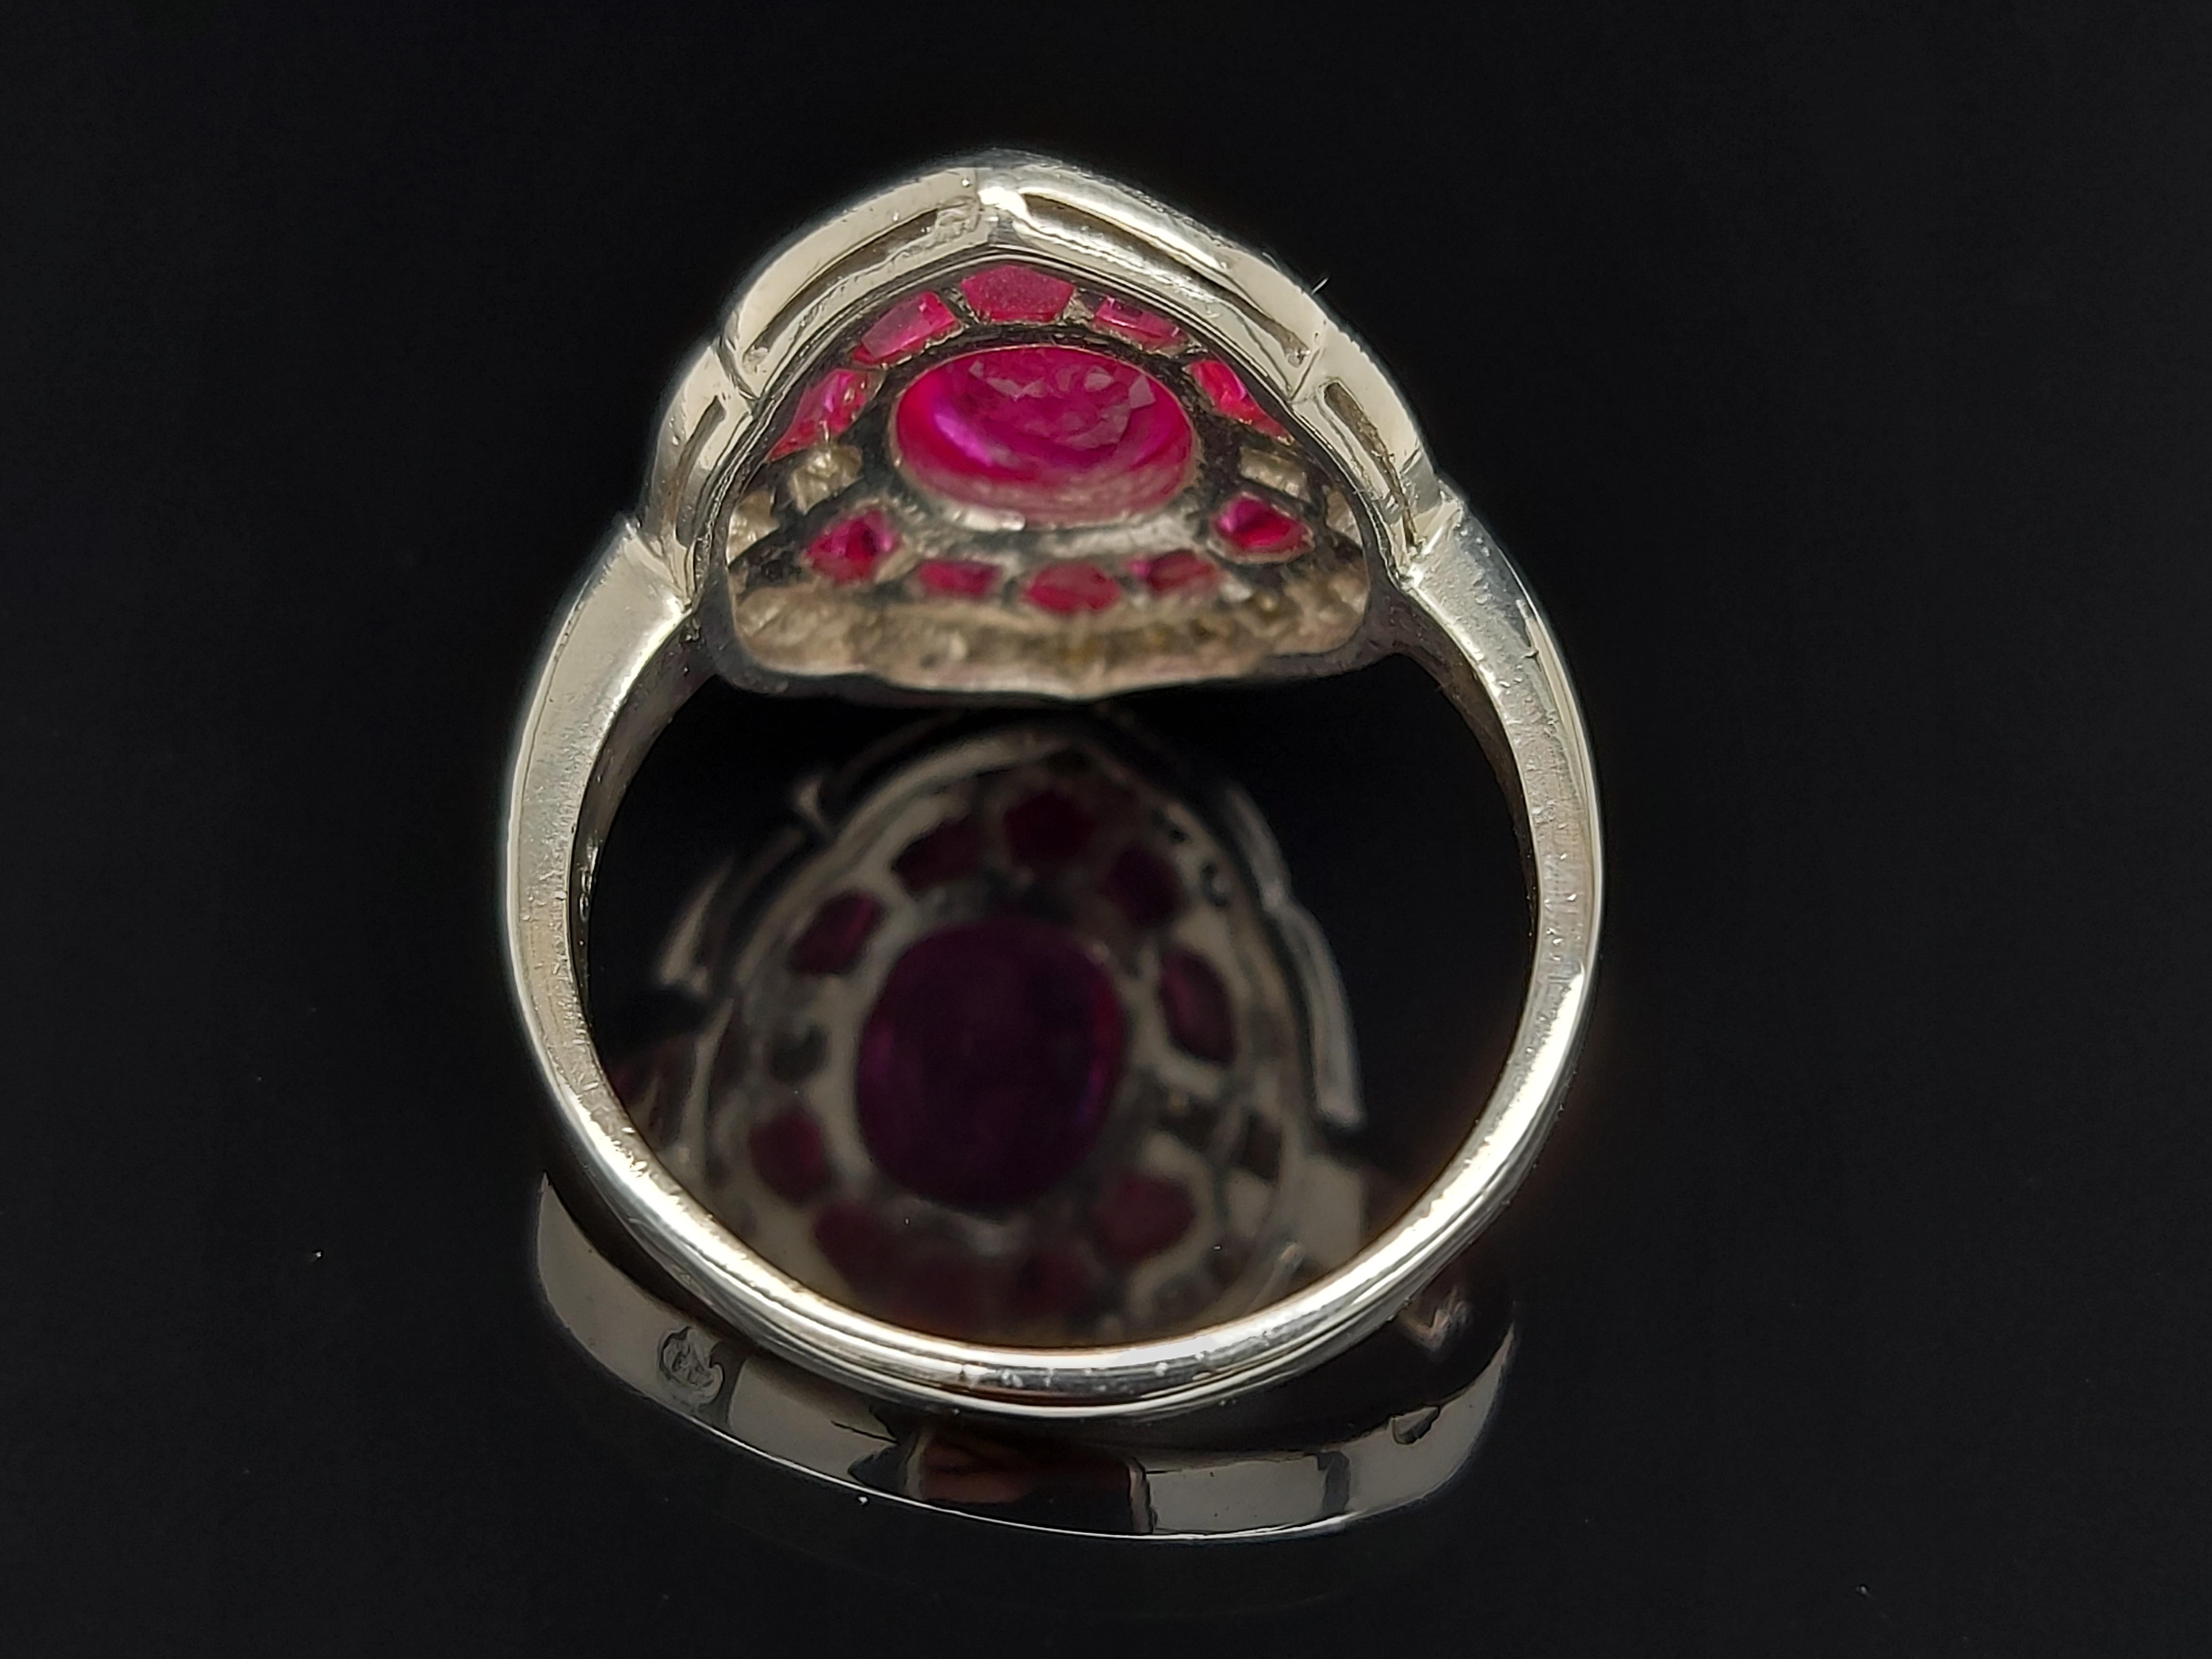 Stunning 18 Karat White Gold Ring with Rubies and Brilliant Cut Diamonds For Sale 2